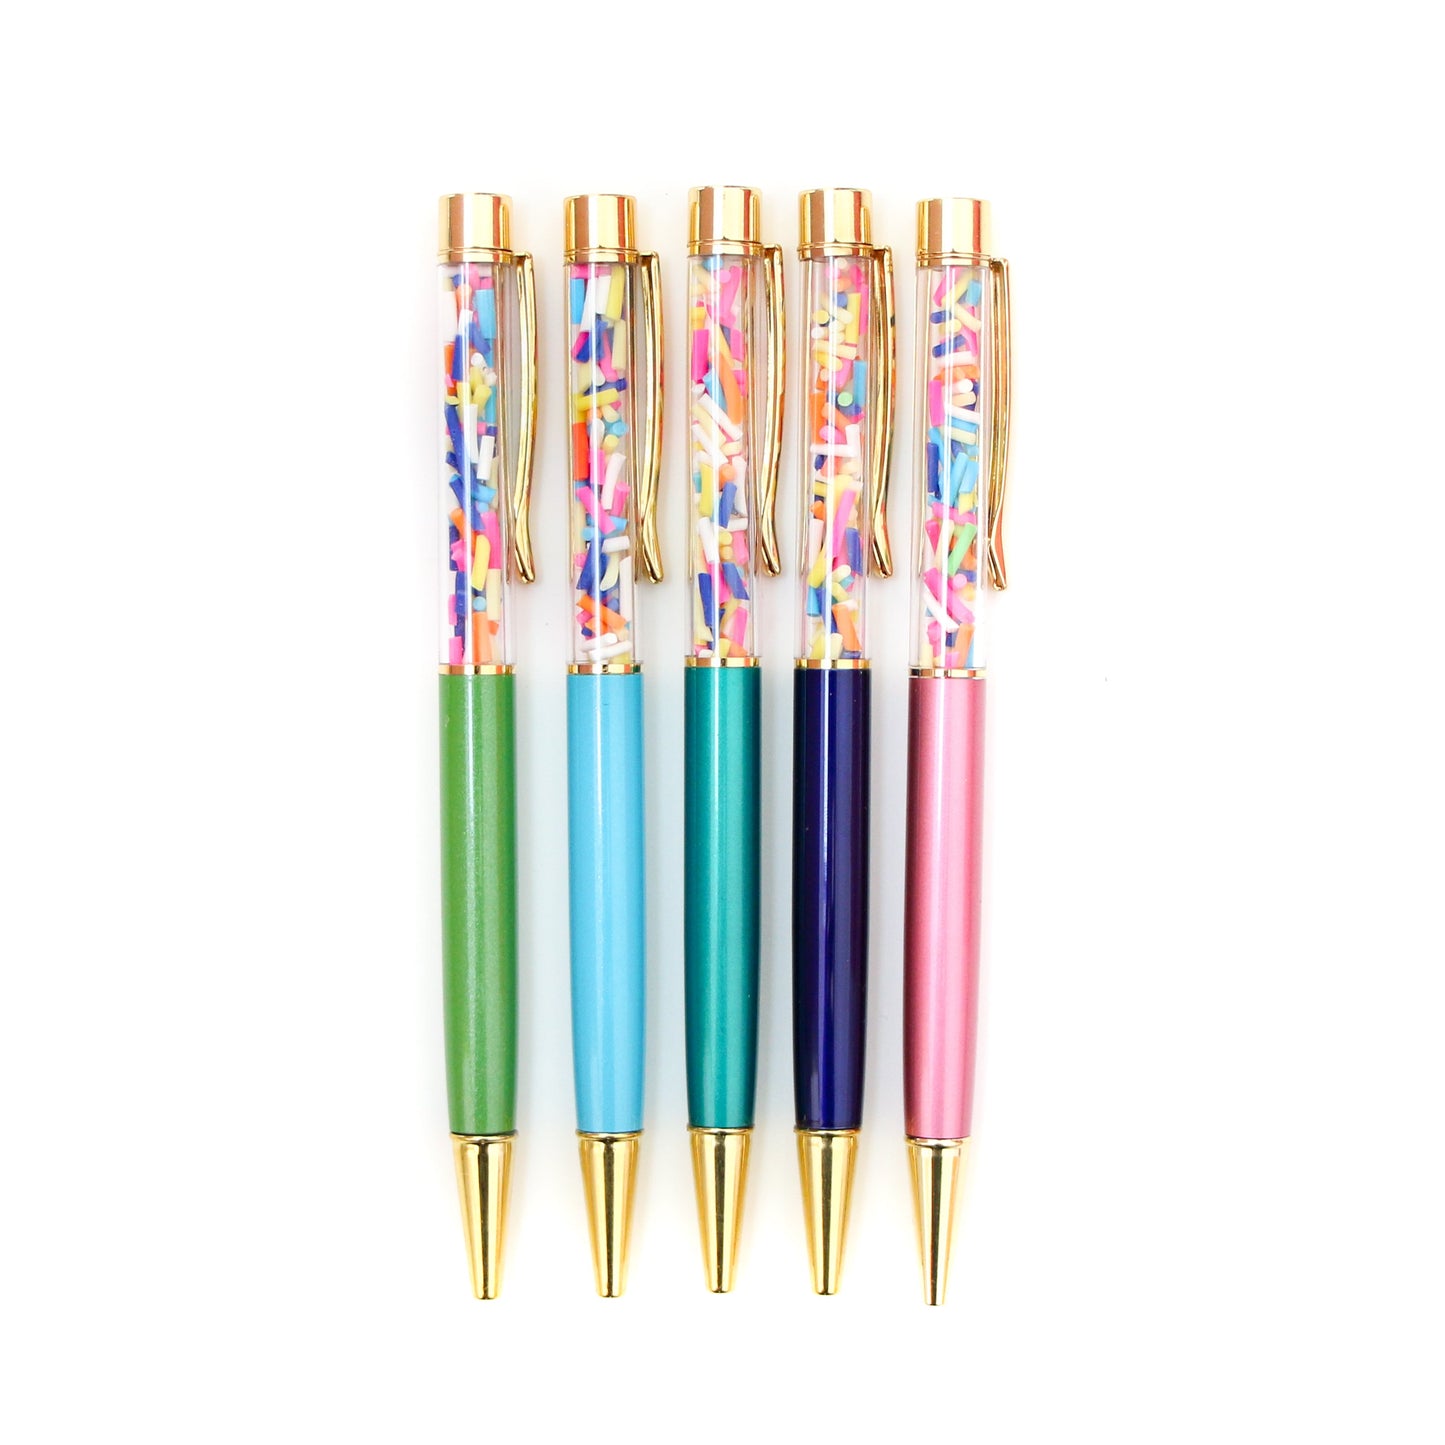 Party Pen - Sprinkle filled pens - Choose your color by Kailo Chic